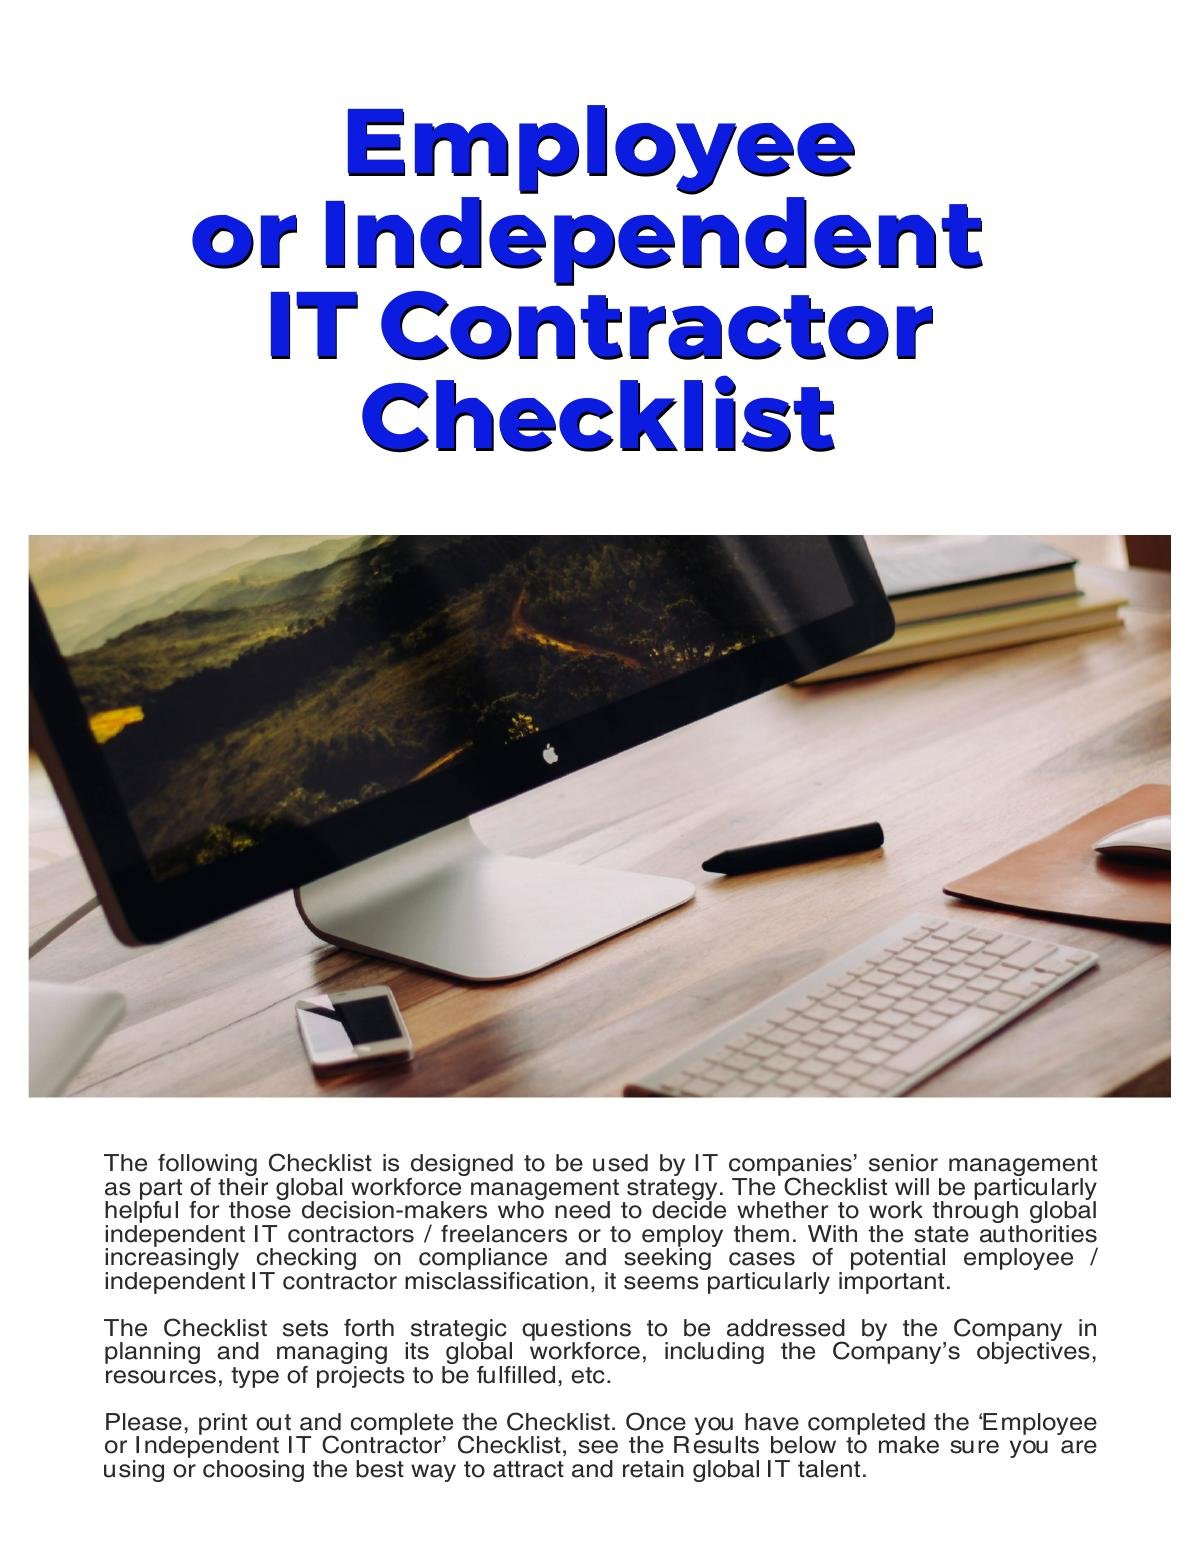 ‘Employee or Independent IT Contractor’ Checklist 